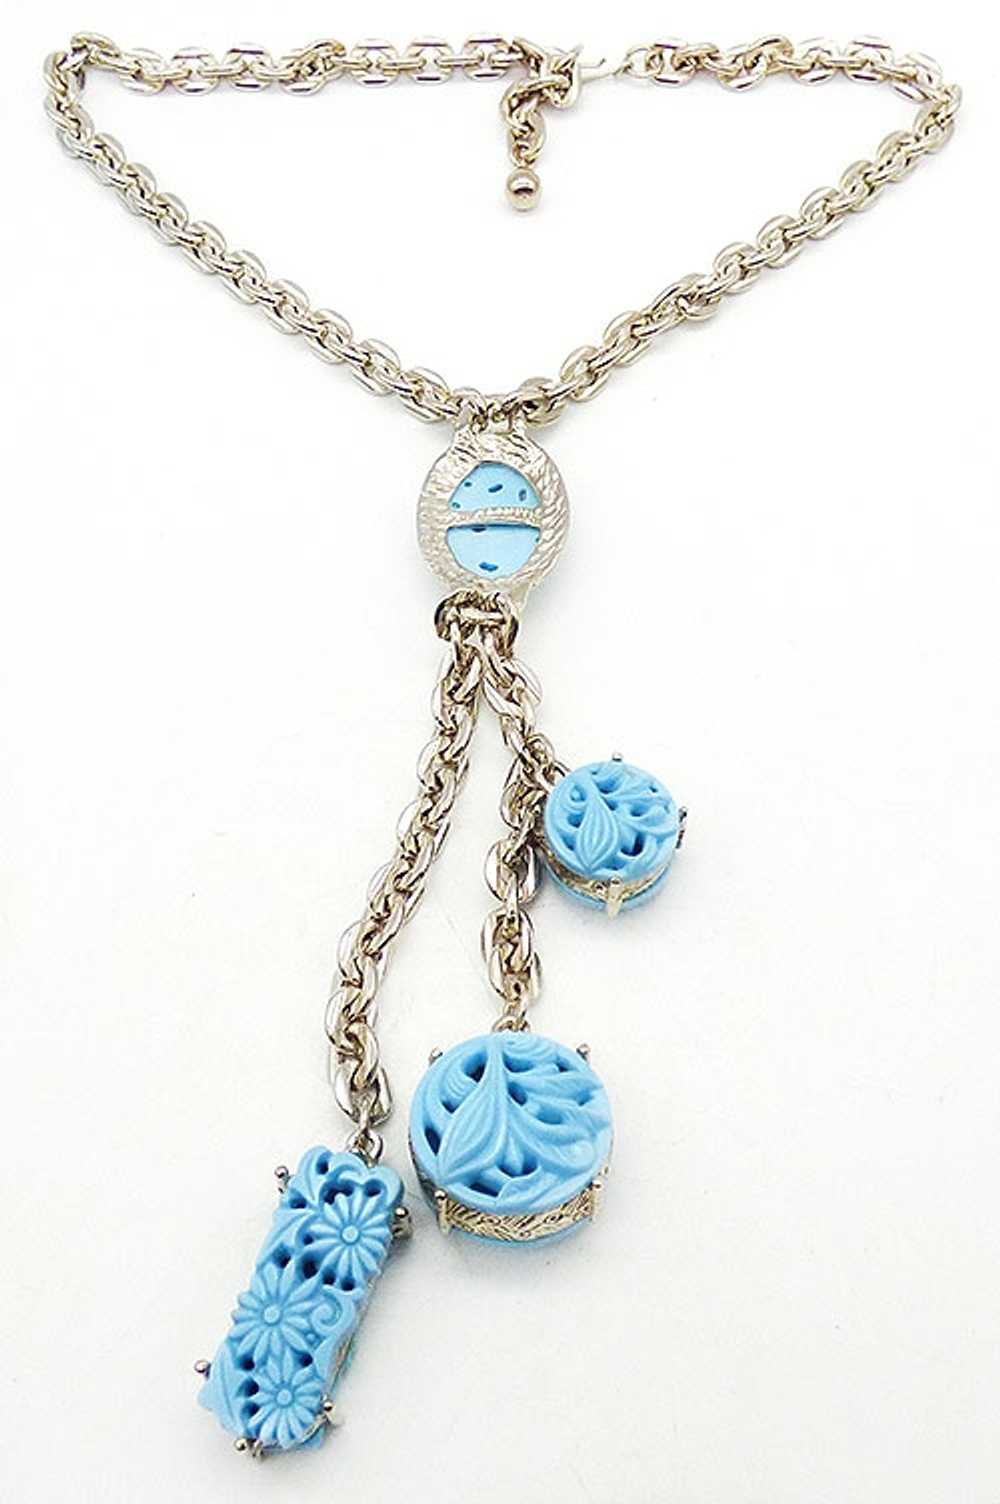 Selro Asian Motif Carved Turquoise Lariat Necklace - image 4